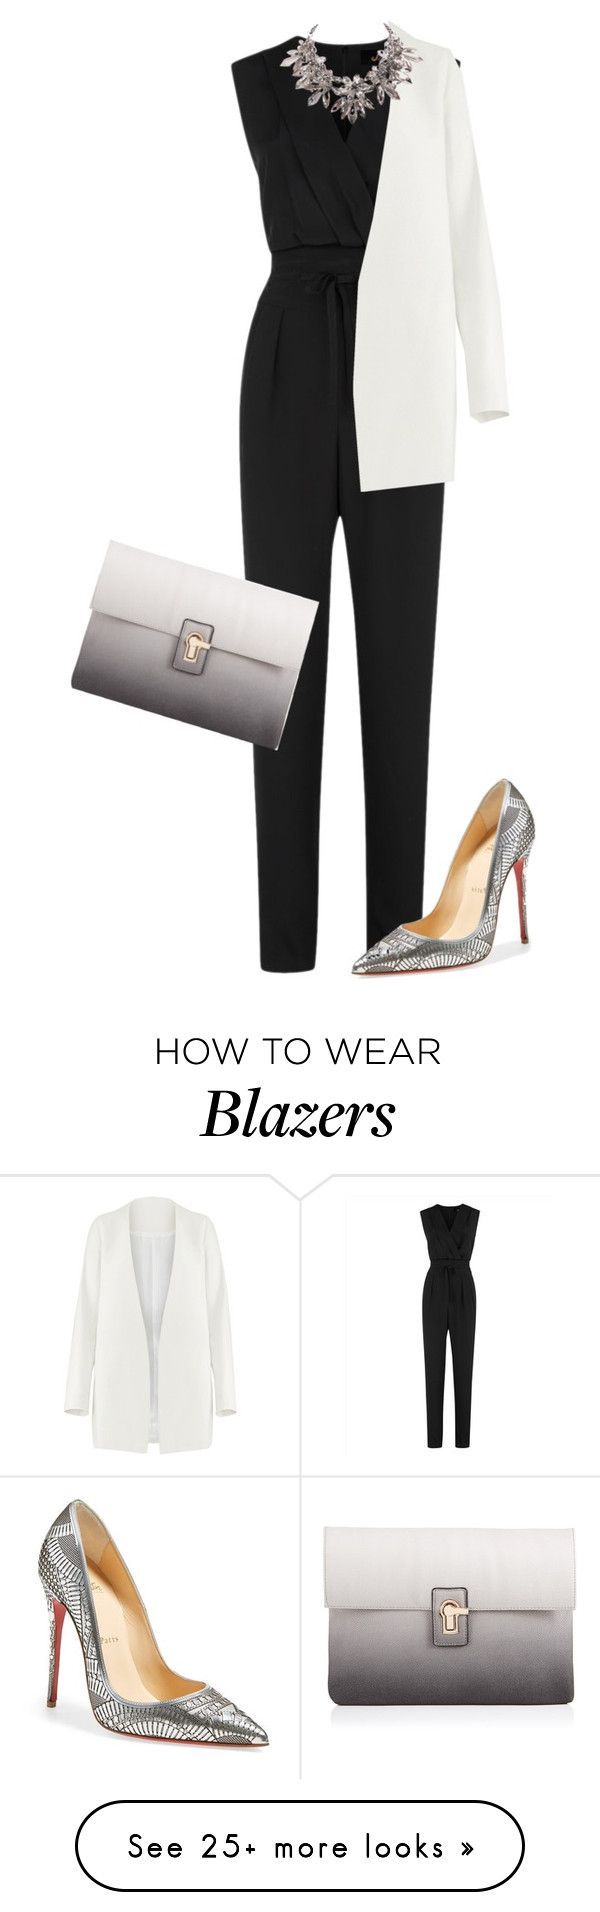 featuring Jaeger, Lipsy, Non and Christian Louboutin